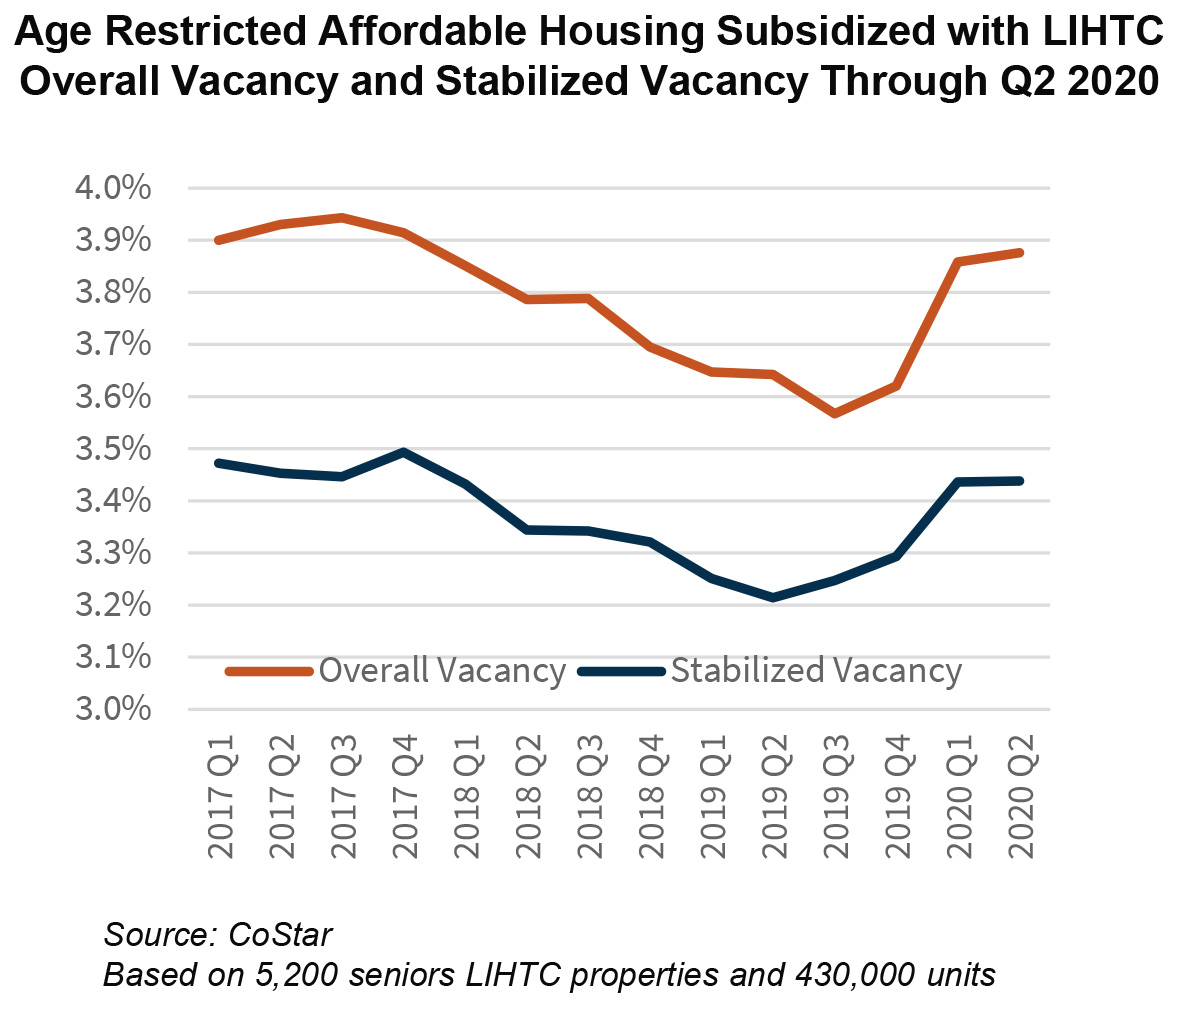 Age Restricted Affordable Housing Subsidized with LIHTC Overall Vacancy and Stabilized Vacancy Through Q2 2020